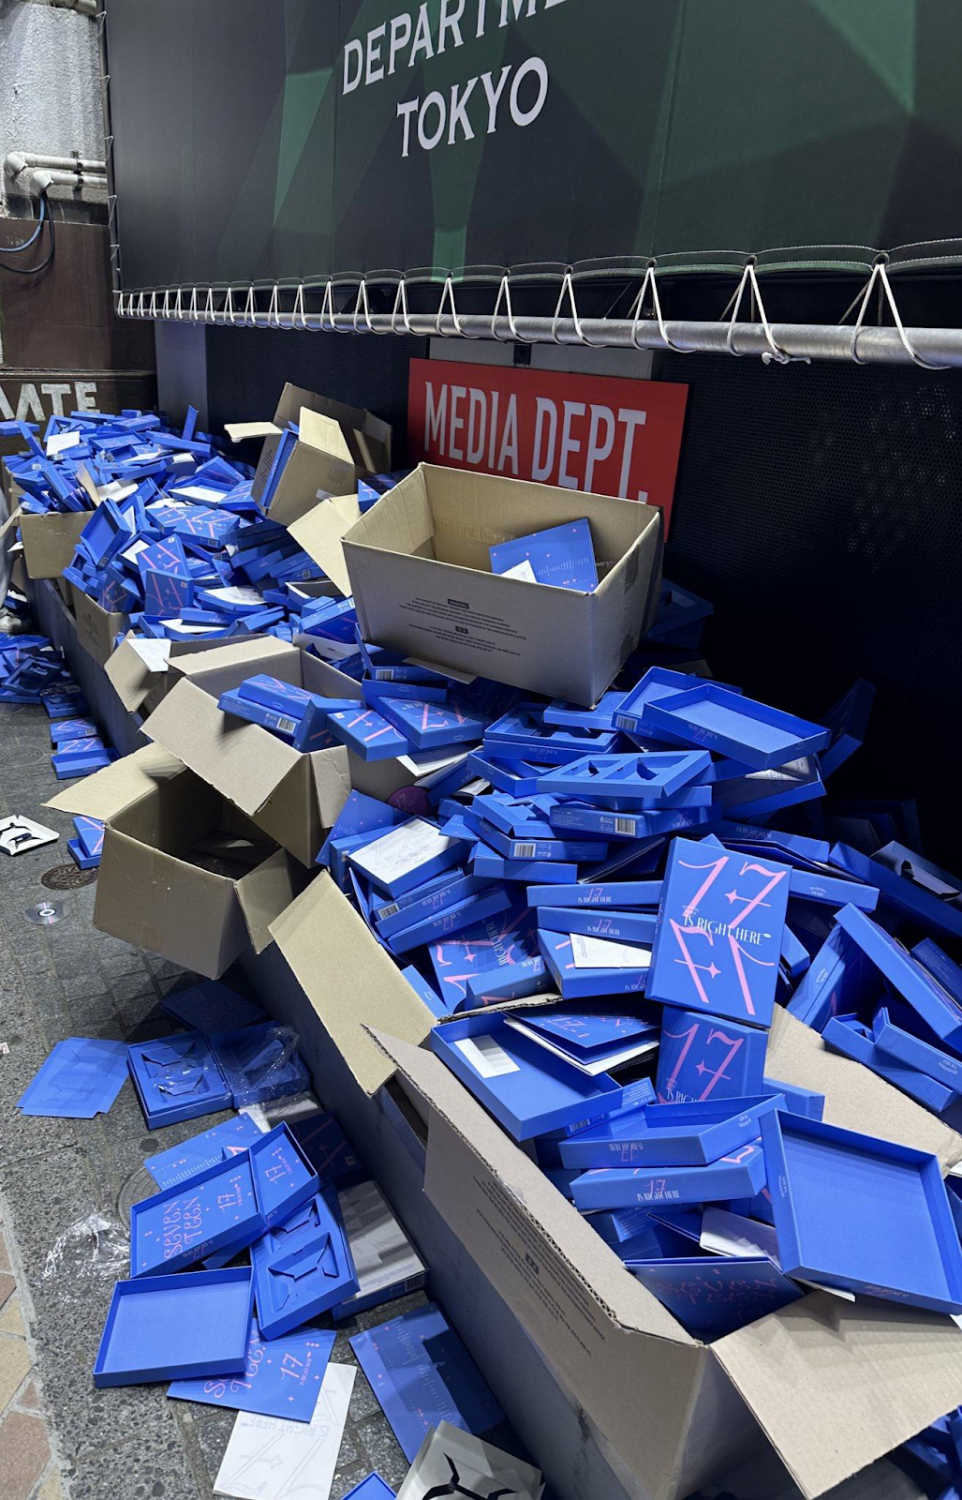 BTS Jungkook, SEVENTEEN's Albums Spotted Piled Up In The Streets: 'It's Only Getting Worse'